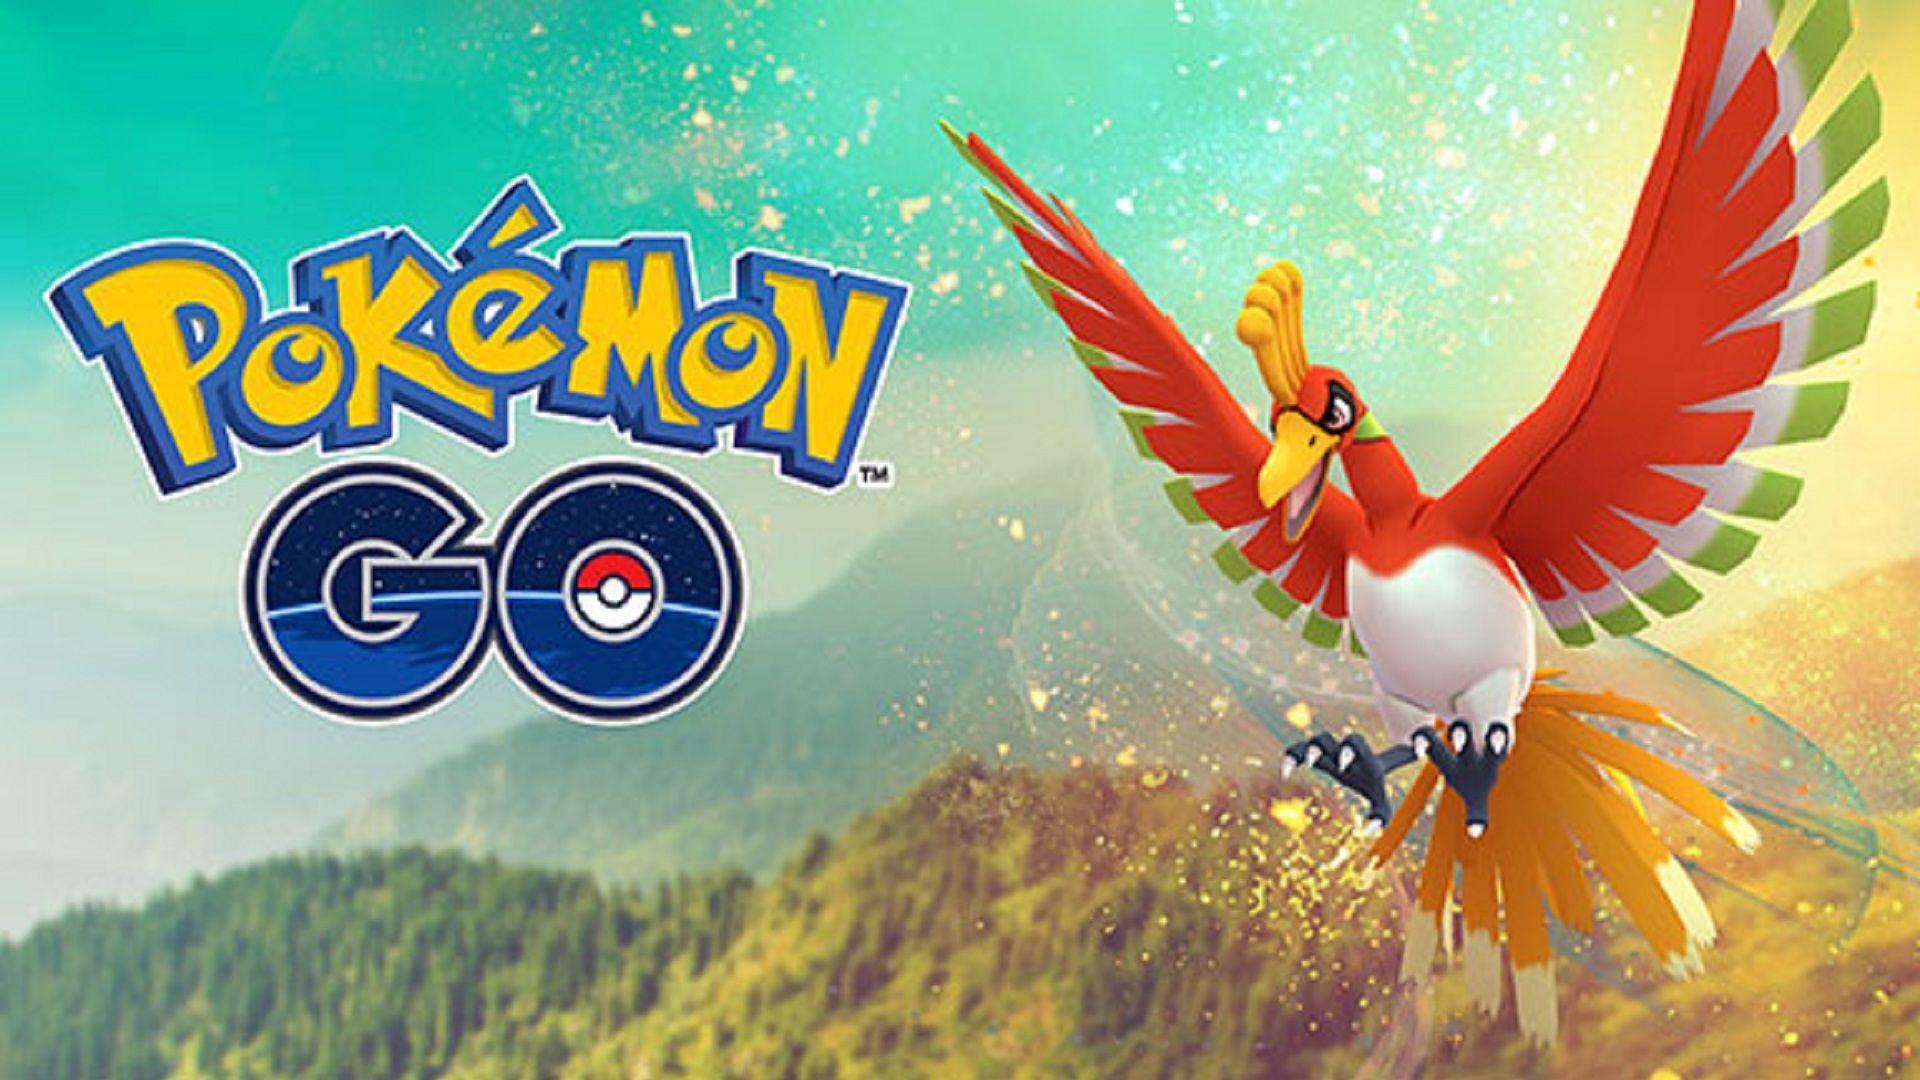 Ho-Oh is currently a five-star raid boss in Pokemon GO (Image via Niantic)